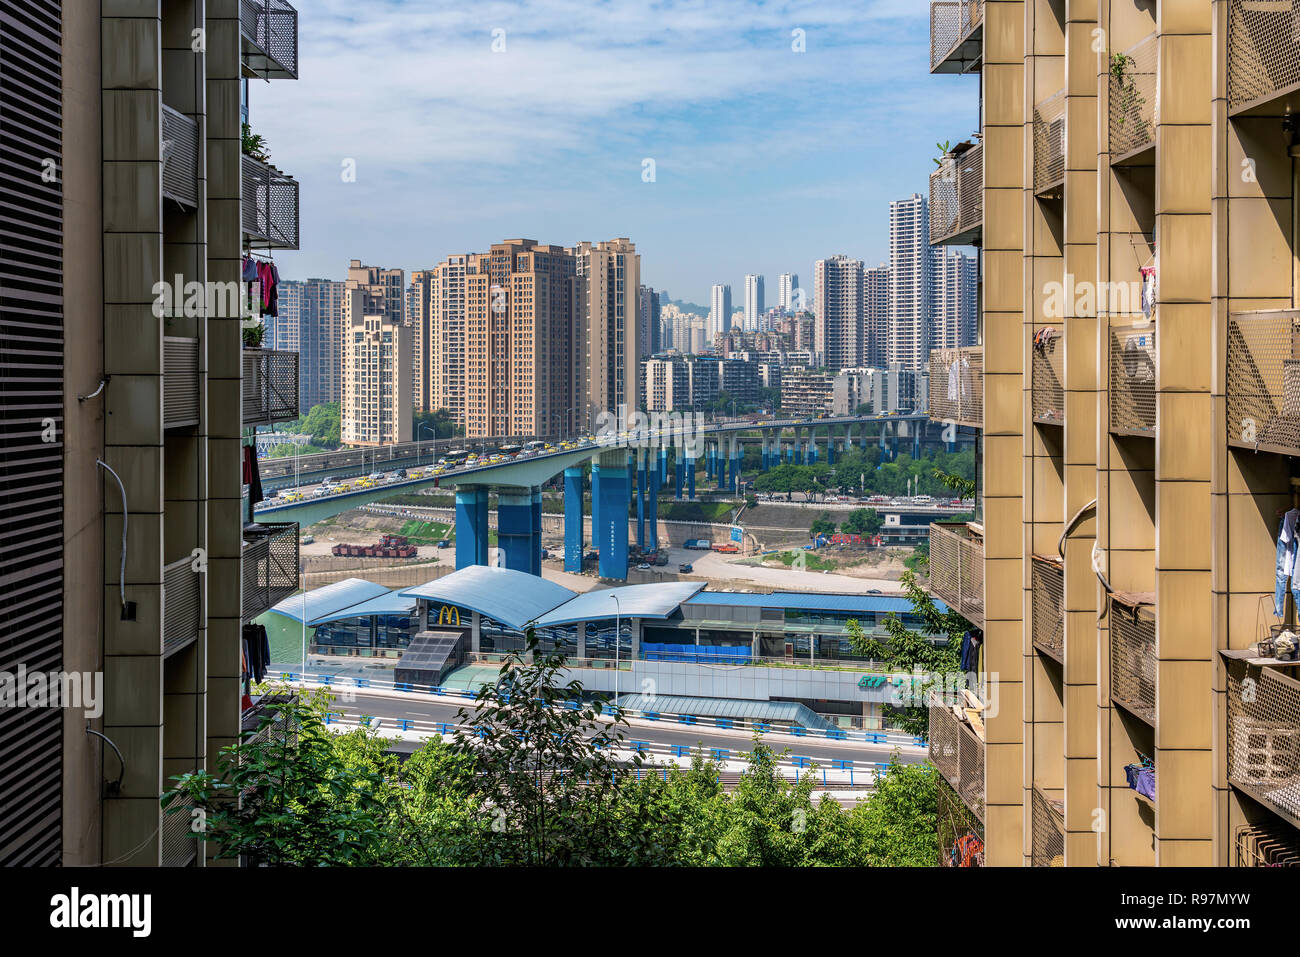 CHONGQING, CHINA - SEPTEMBER 19: City view from apartment buildings in the Yuzhong district on September 19, 2018 in Chognqing Stock Photo